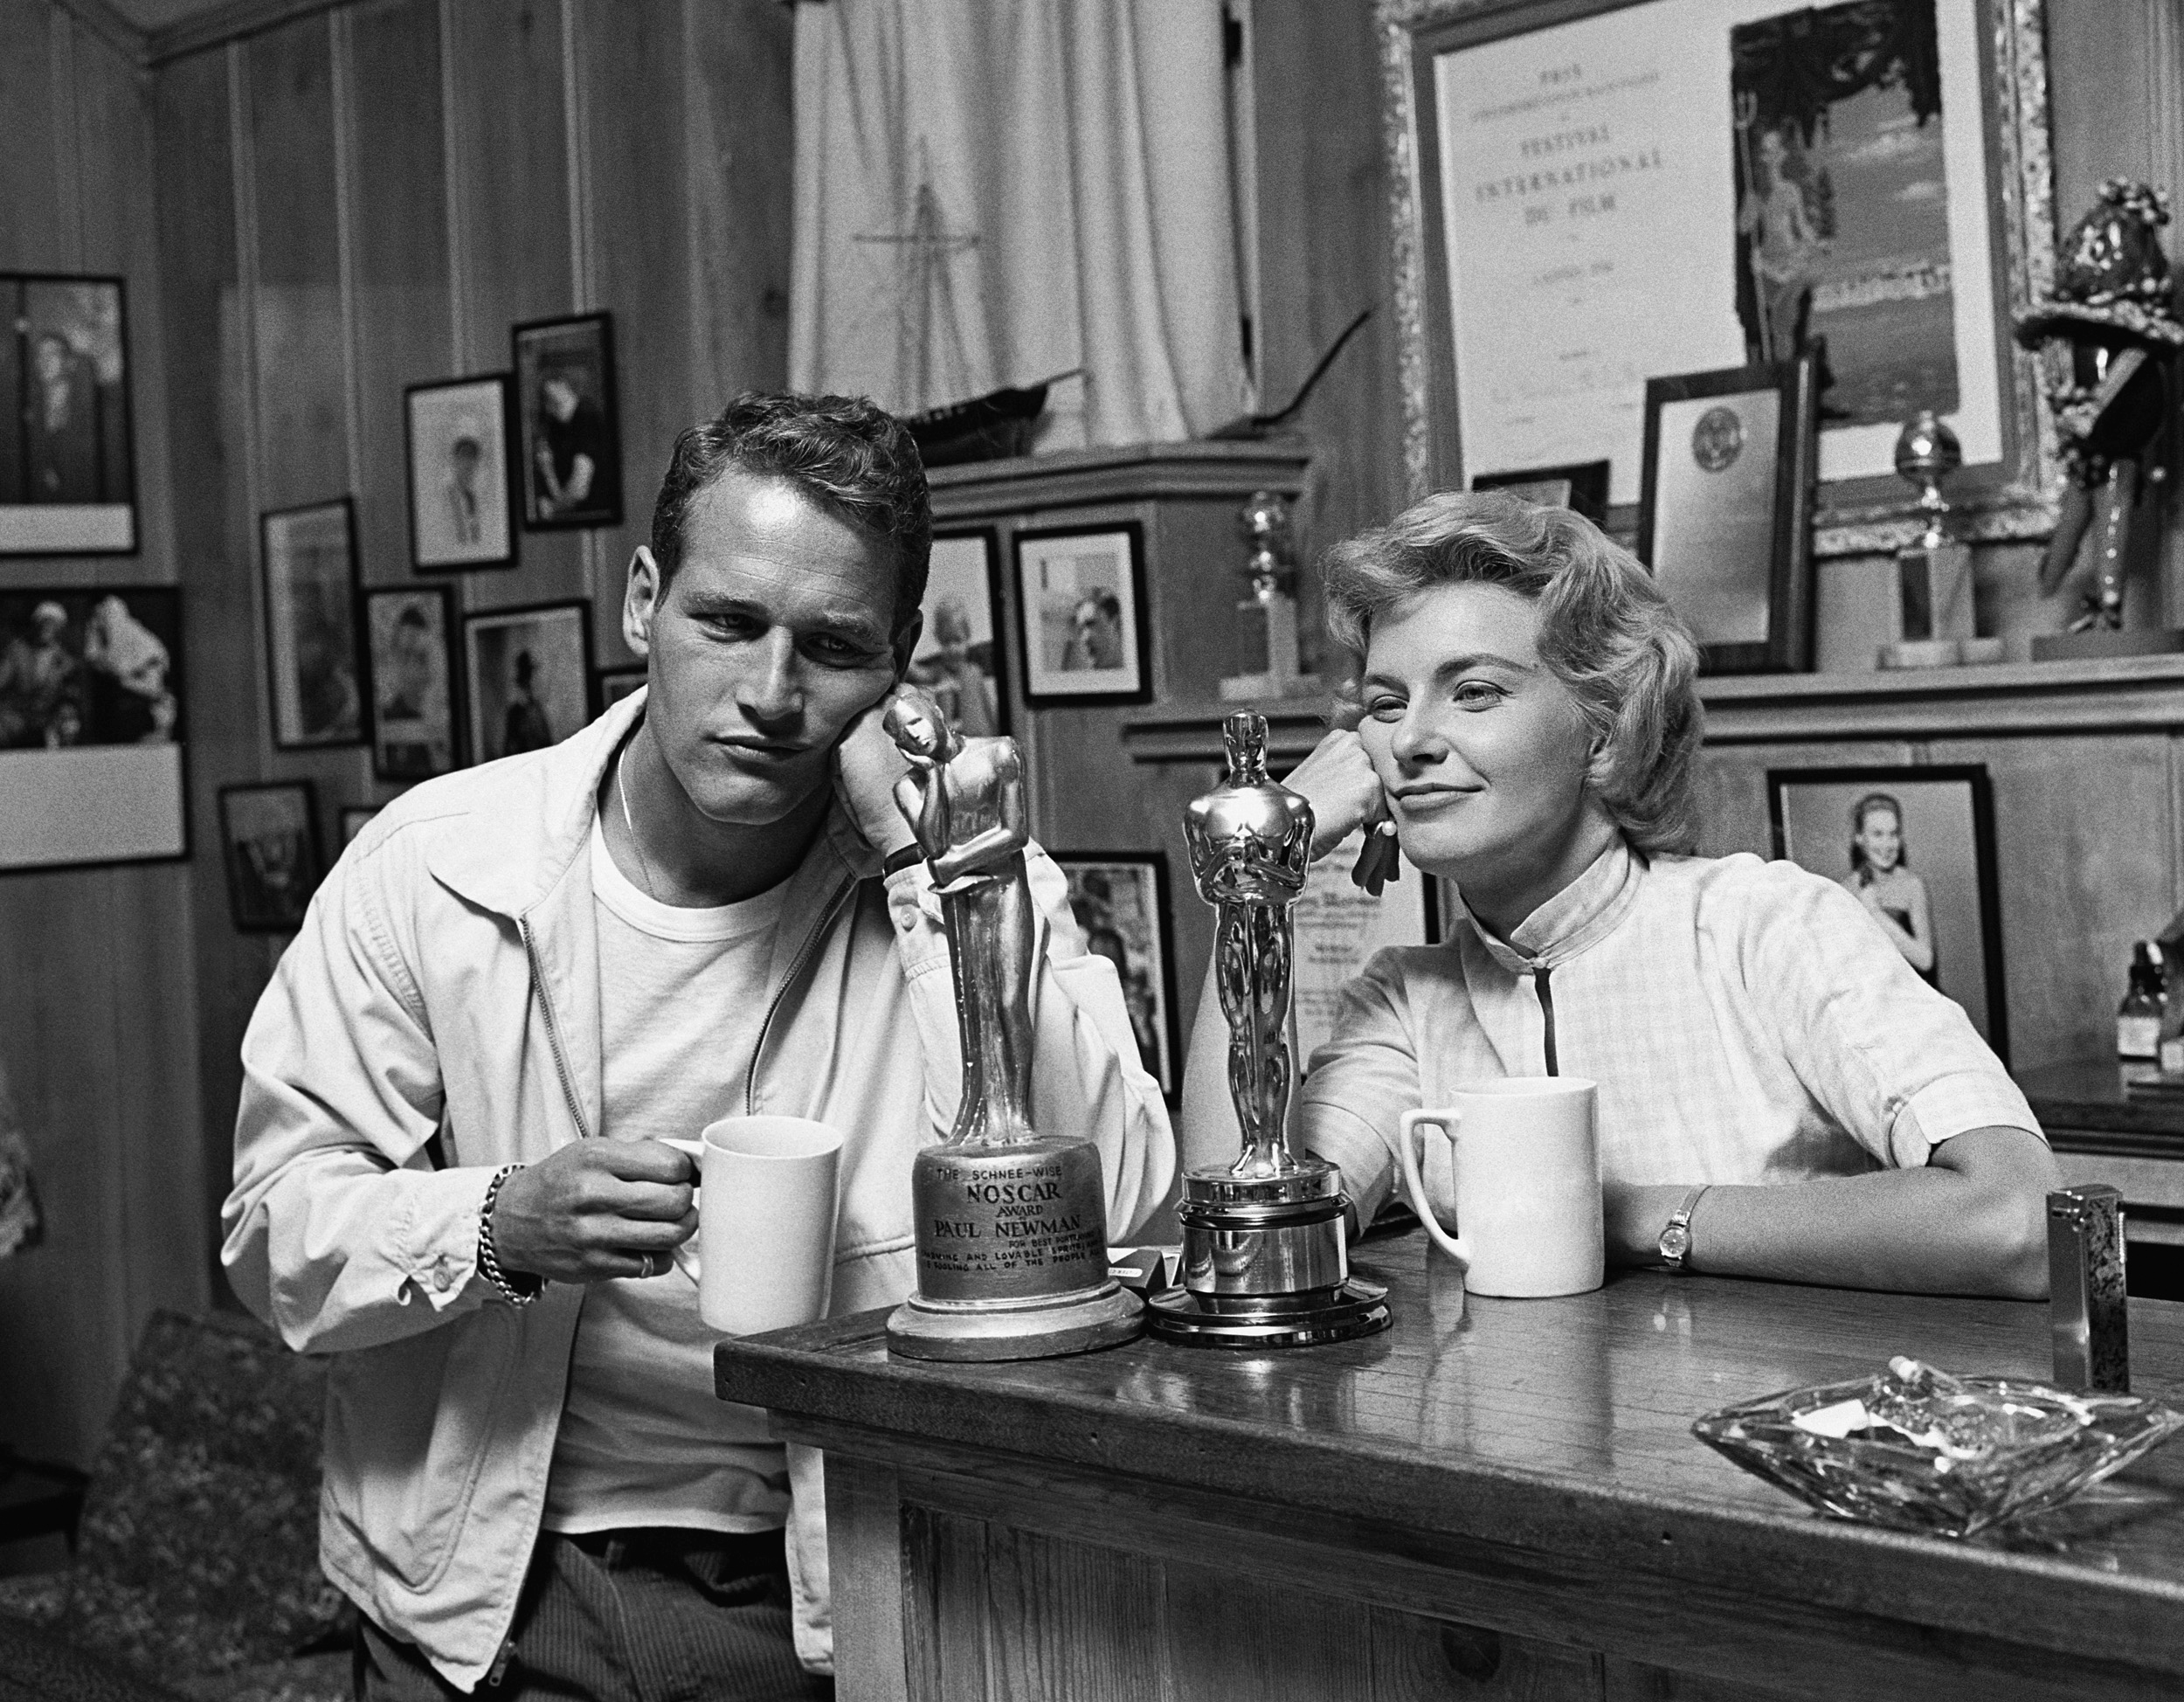 Joanne Woodward won an Oscar for The Three Faces of Eve. Paul Newman had never won an Oscar so Joanne made one for him called  Noscar  (No Oscar) and presented it to him, 1958.